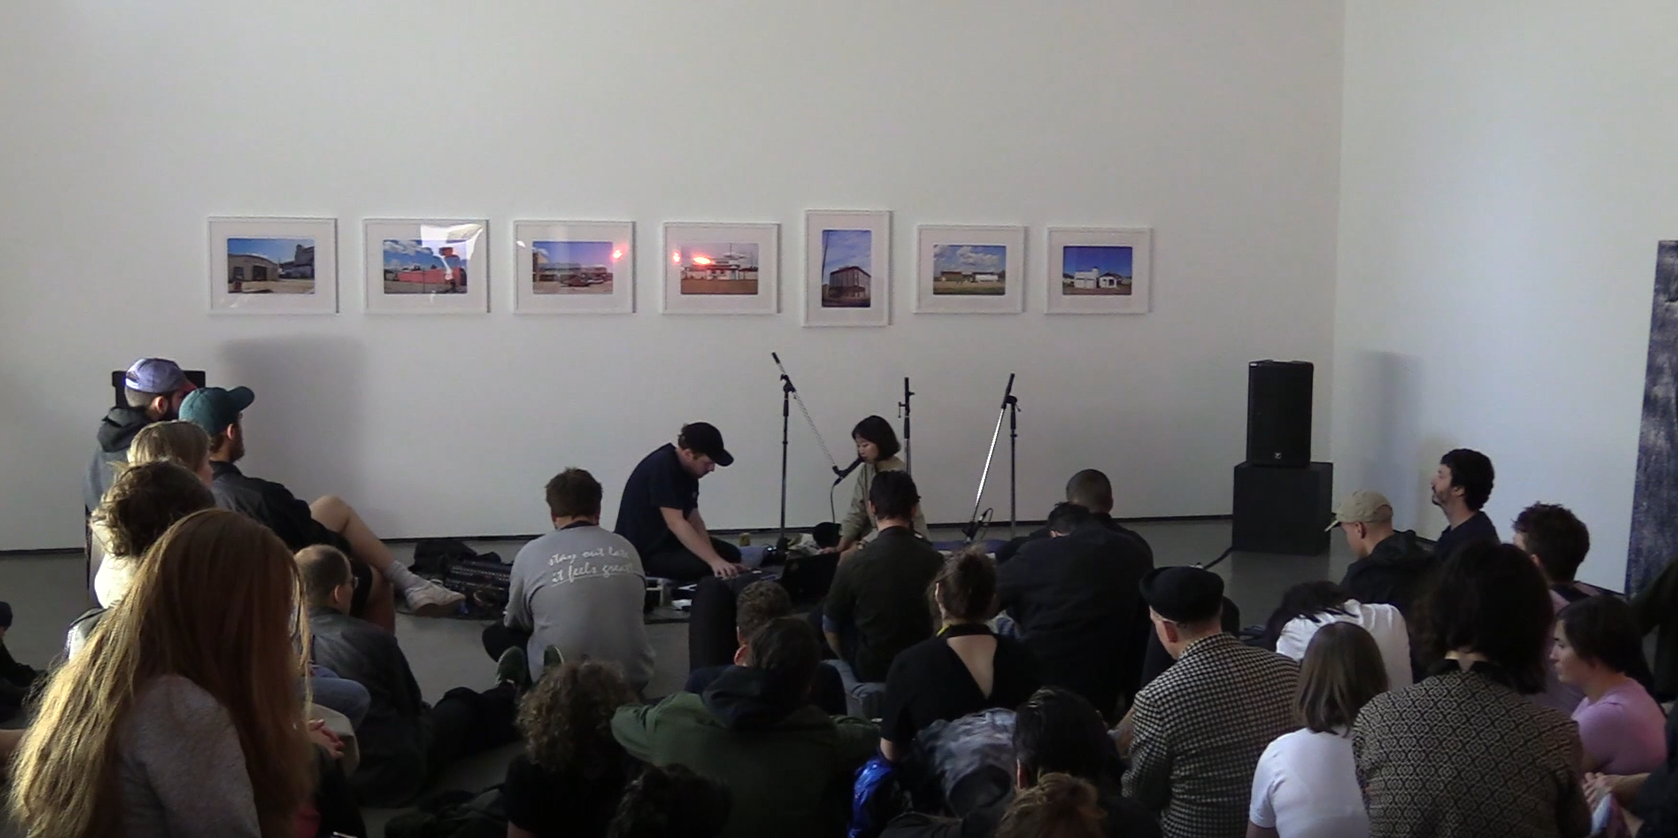 An image of a drumset and mikes being set up in front of a gallery wall. Seven landscape photographs are installed on the wall. The audience sit on the floor and waiting for the performance to start. 